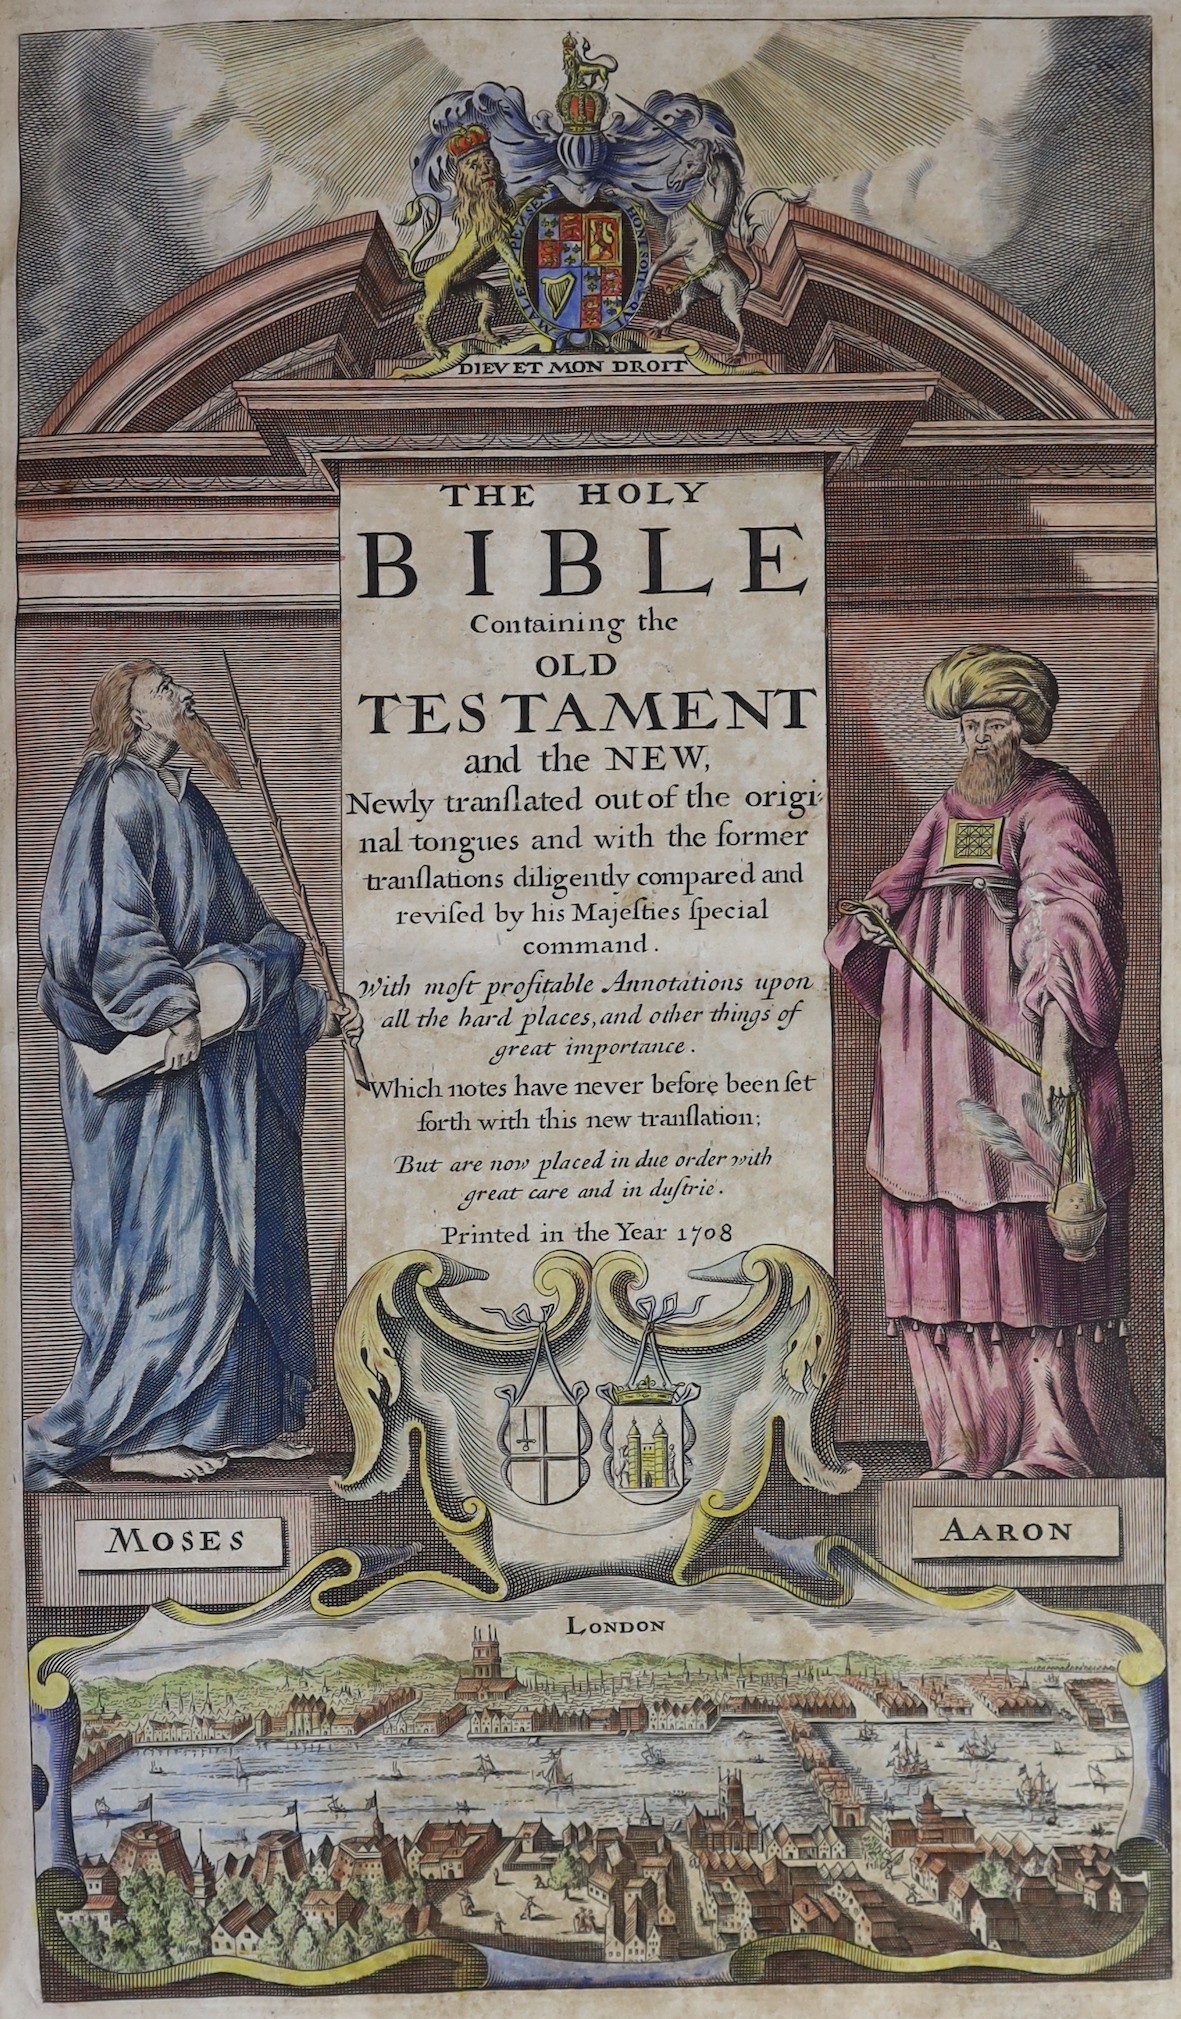 (Amsterdam - Printed 18th Century Folio Bible - Authorised Version, with Geneva Notes) The Holy Bible Containing the Old Testament and the New.......With most profitable Annotations....hand-coloured pictorial engraved an